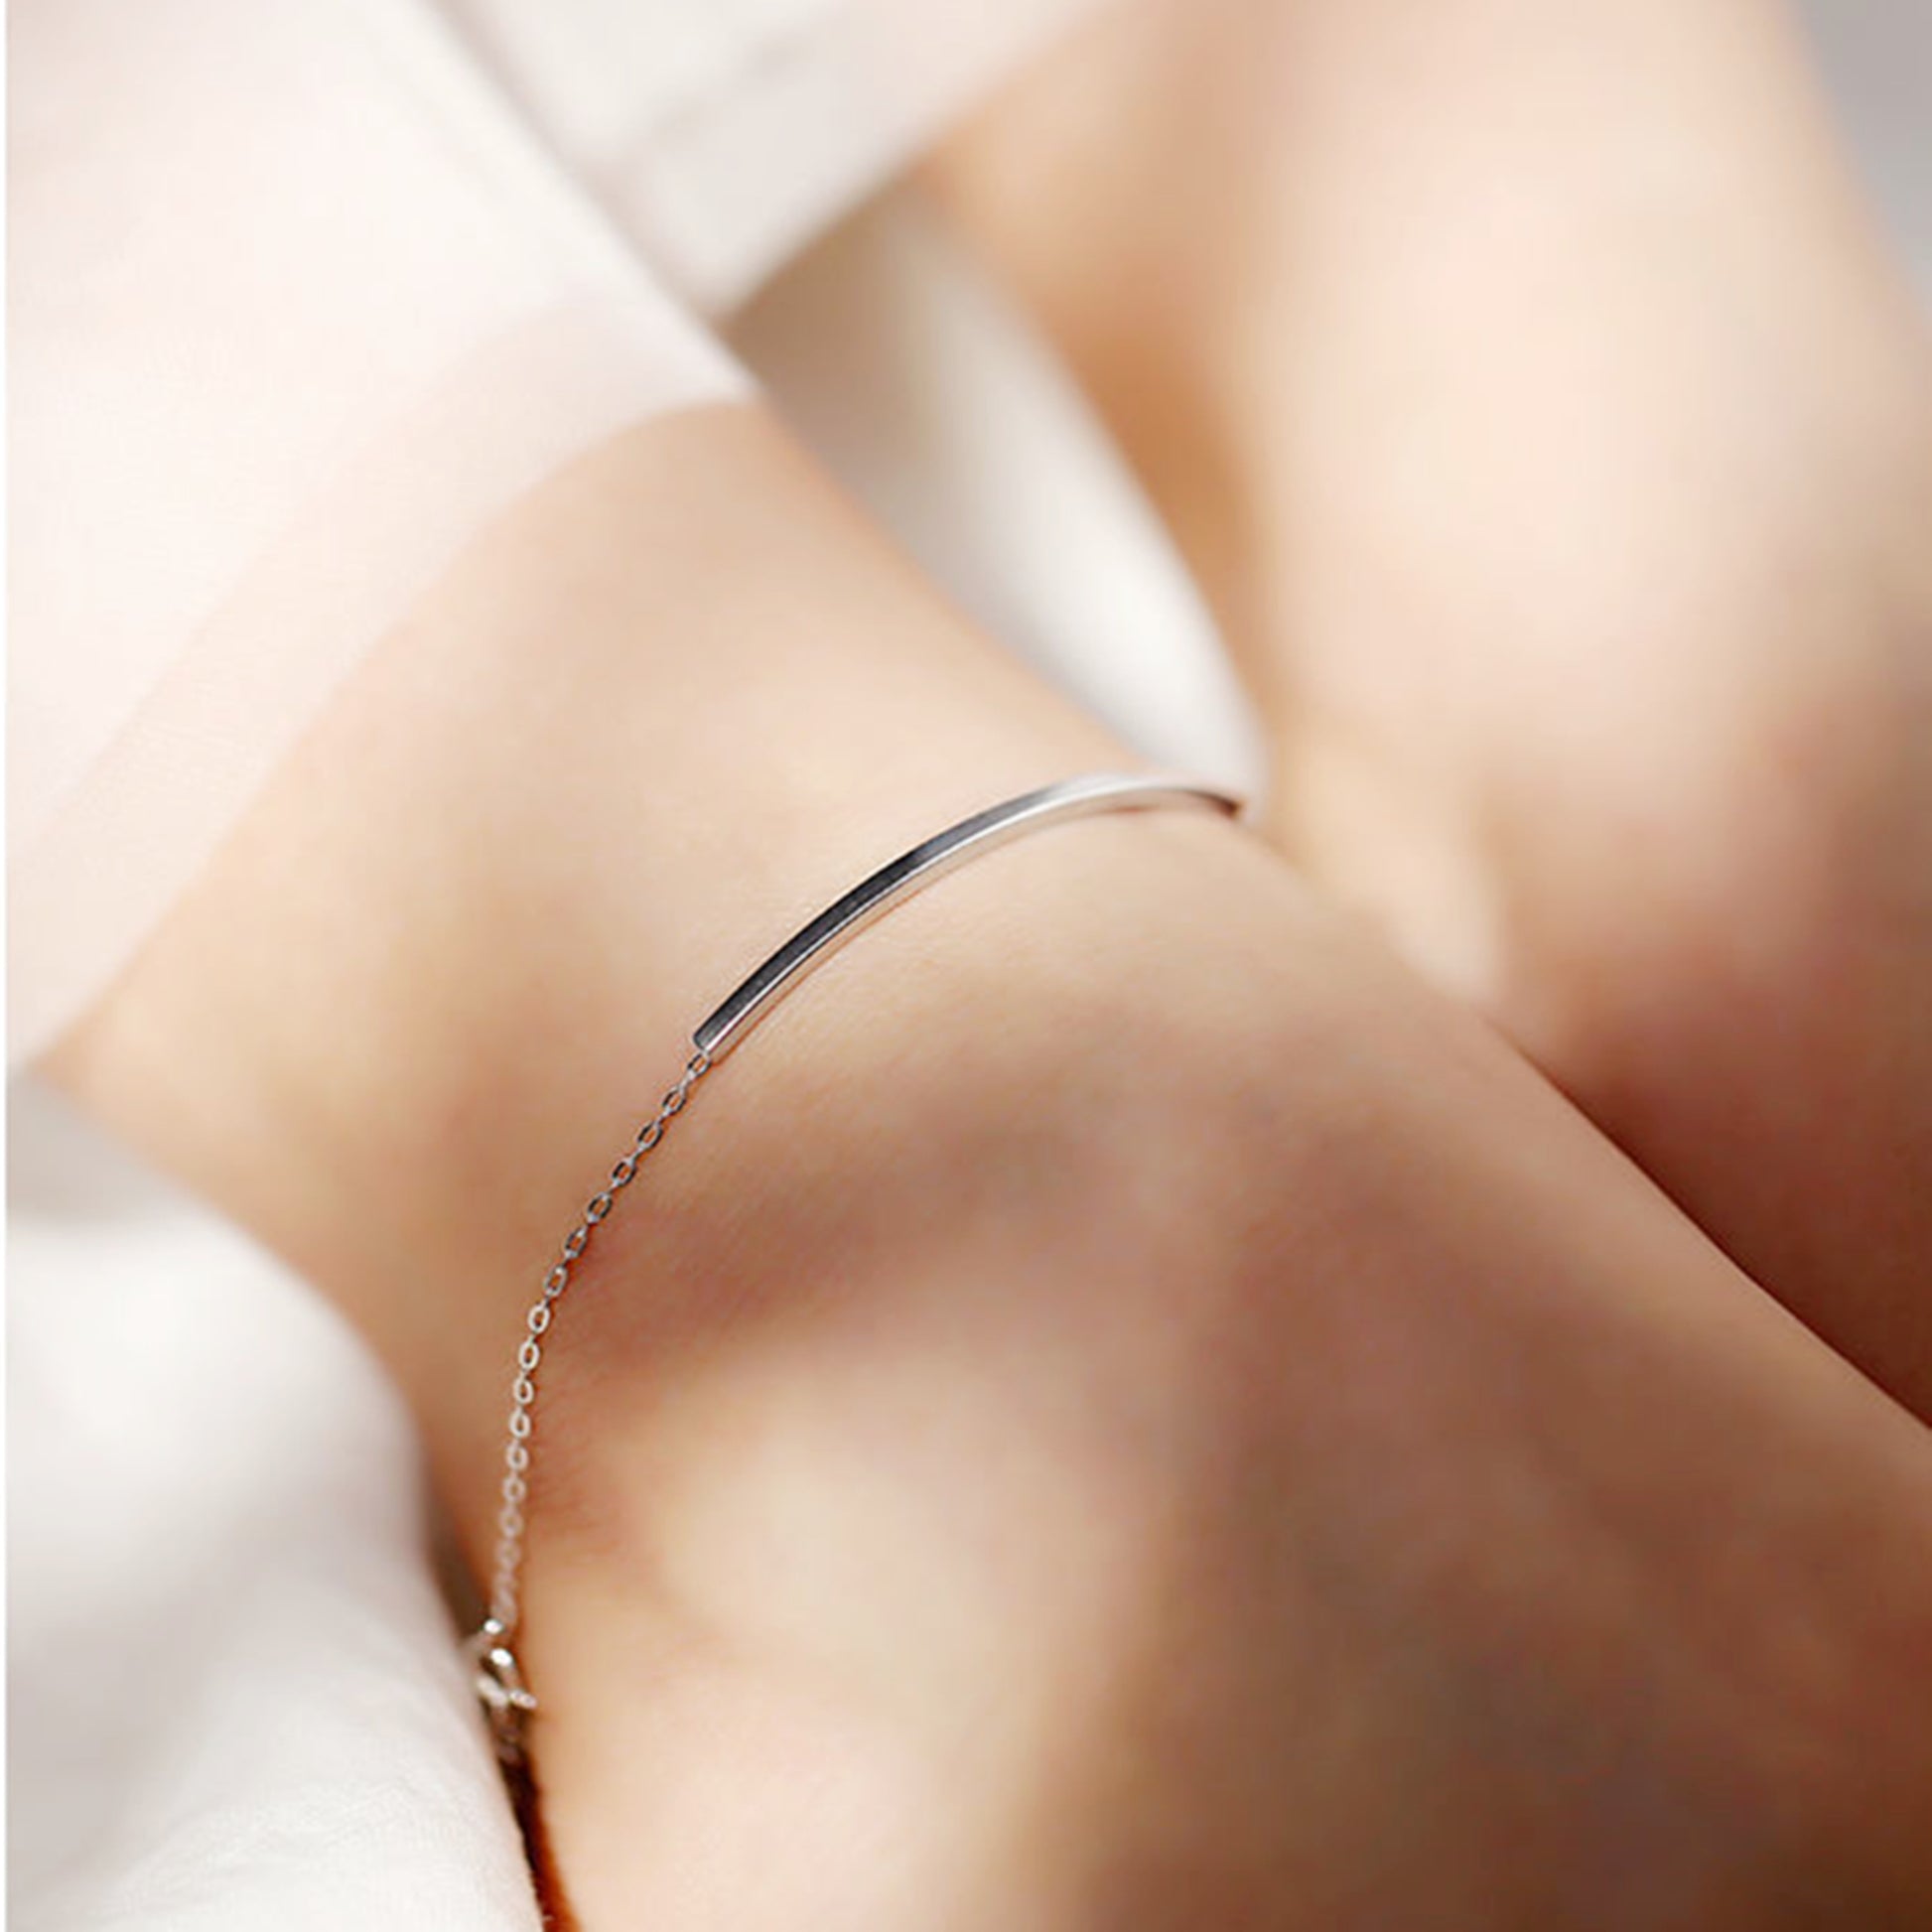 Sterling Silver Hollow Curved Square Noodle Tube Curb Chain Anklet 19.5 - 23.5cm - sugarkittenlondon